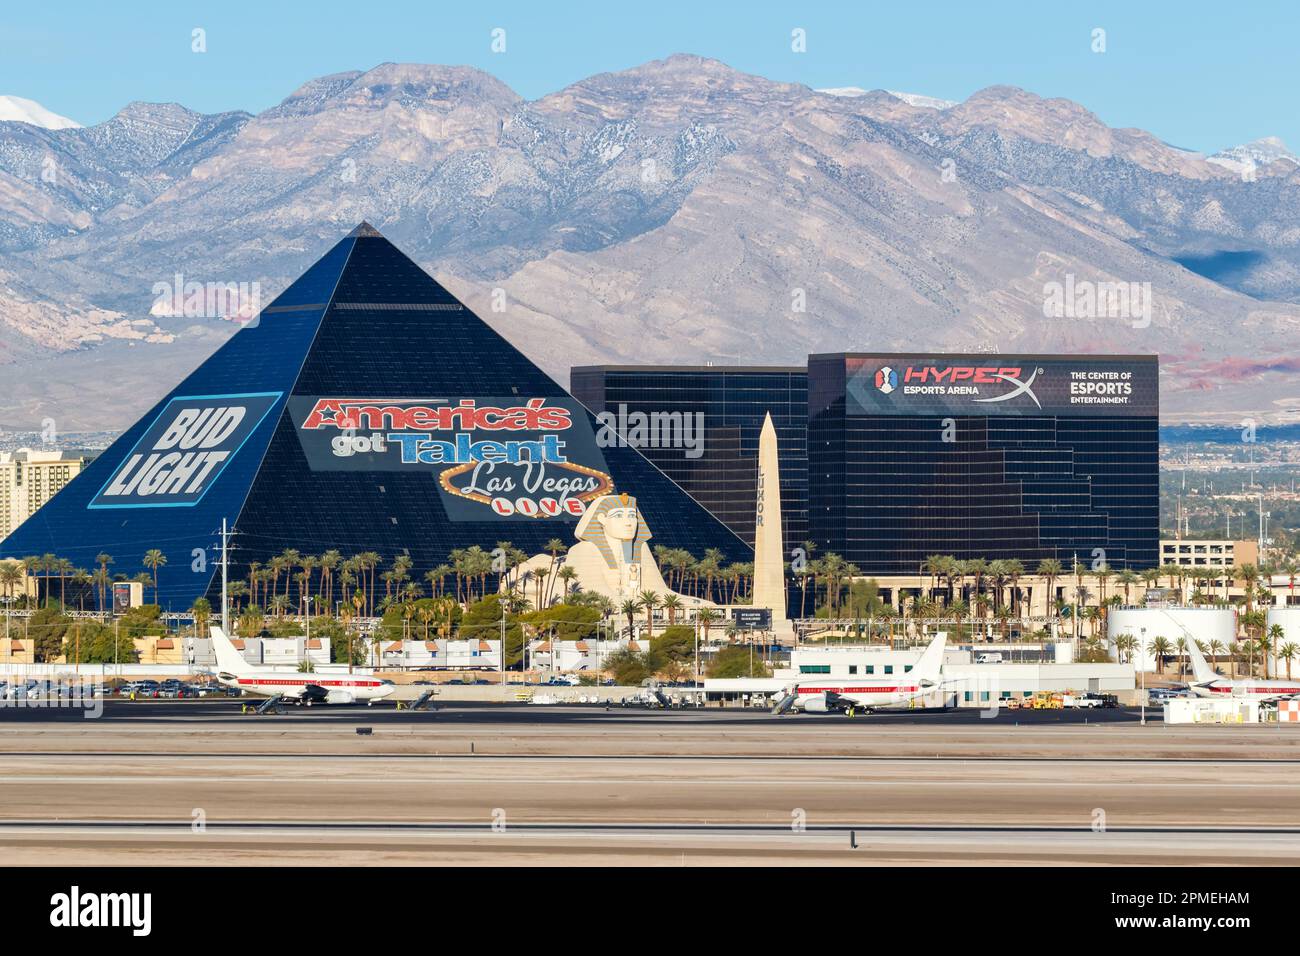 Las Vegas, United States – November 9, 2022: Janet EG&G Boeing airplanes at Las Vegas airport (LAS) in the United States. Stock Photo